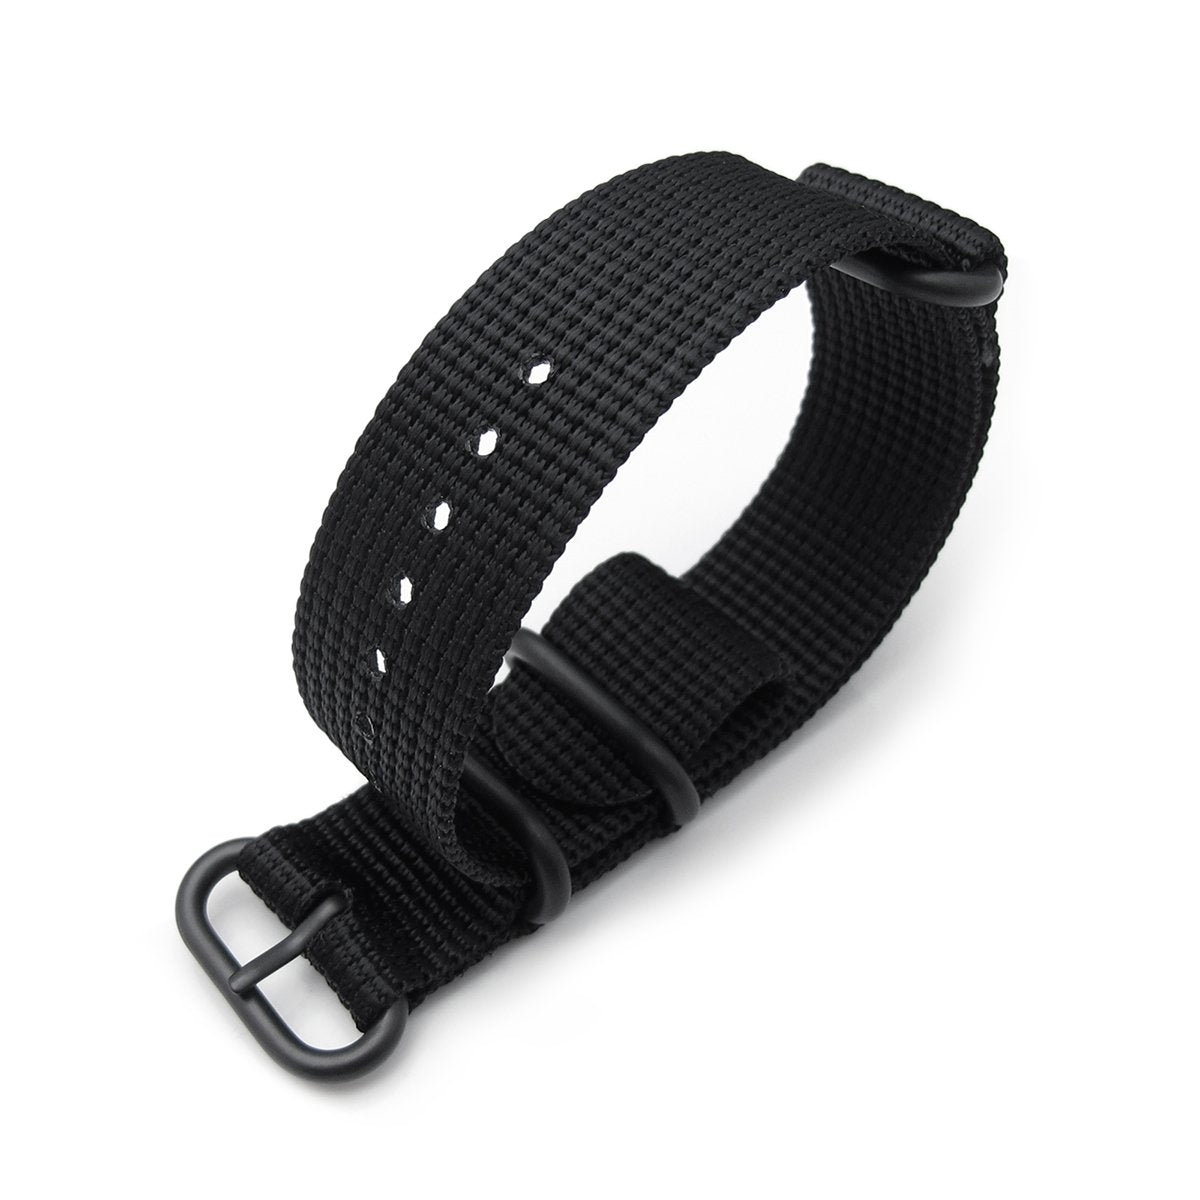 MiLTAT 3 Rings Zulu military watch strap 3D woven nylon armband Black PVD Black 18mm to 26mm Strapcode Watch Bands